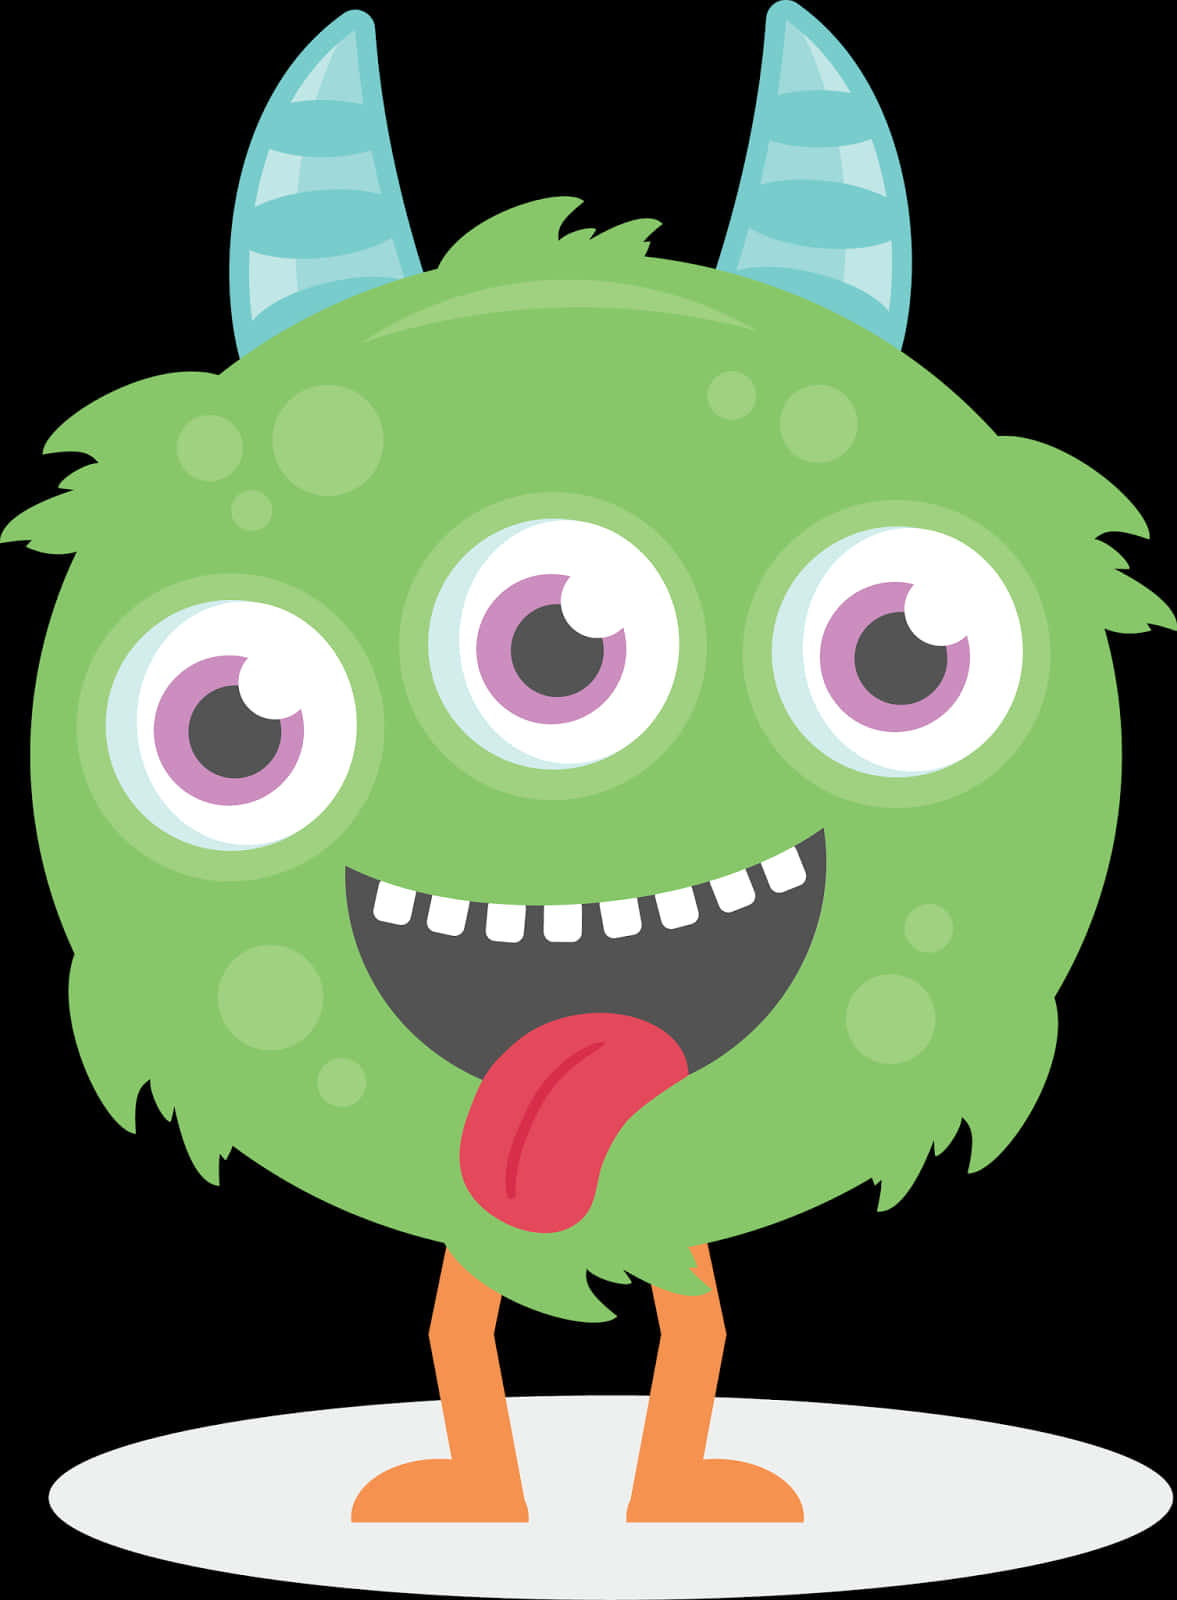 Cute Cartoon Monster Sticking Out Tongue PNG